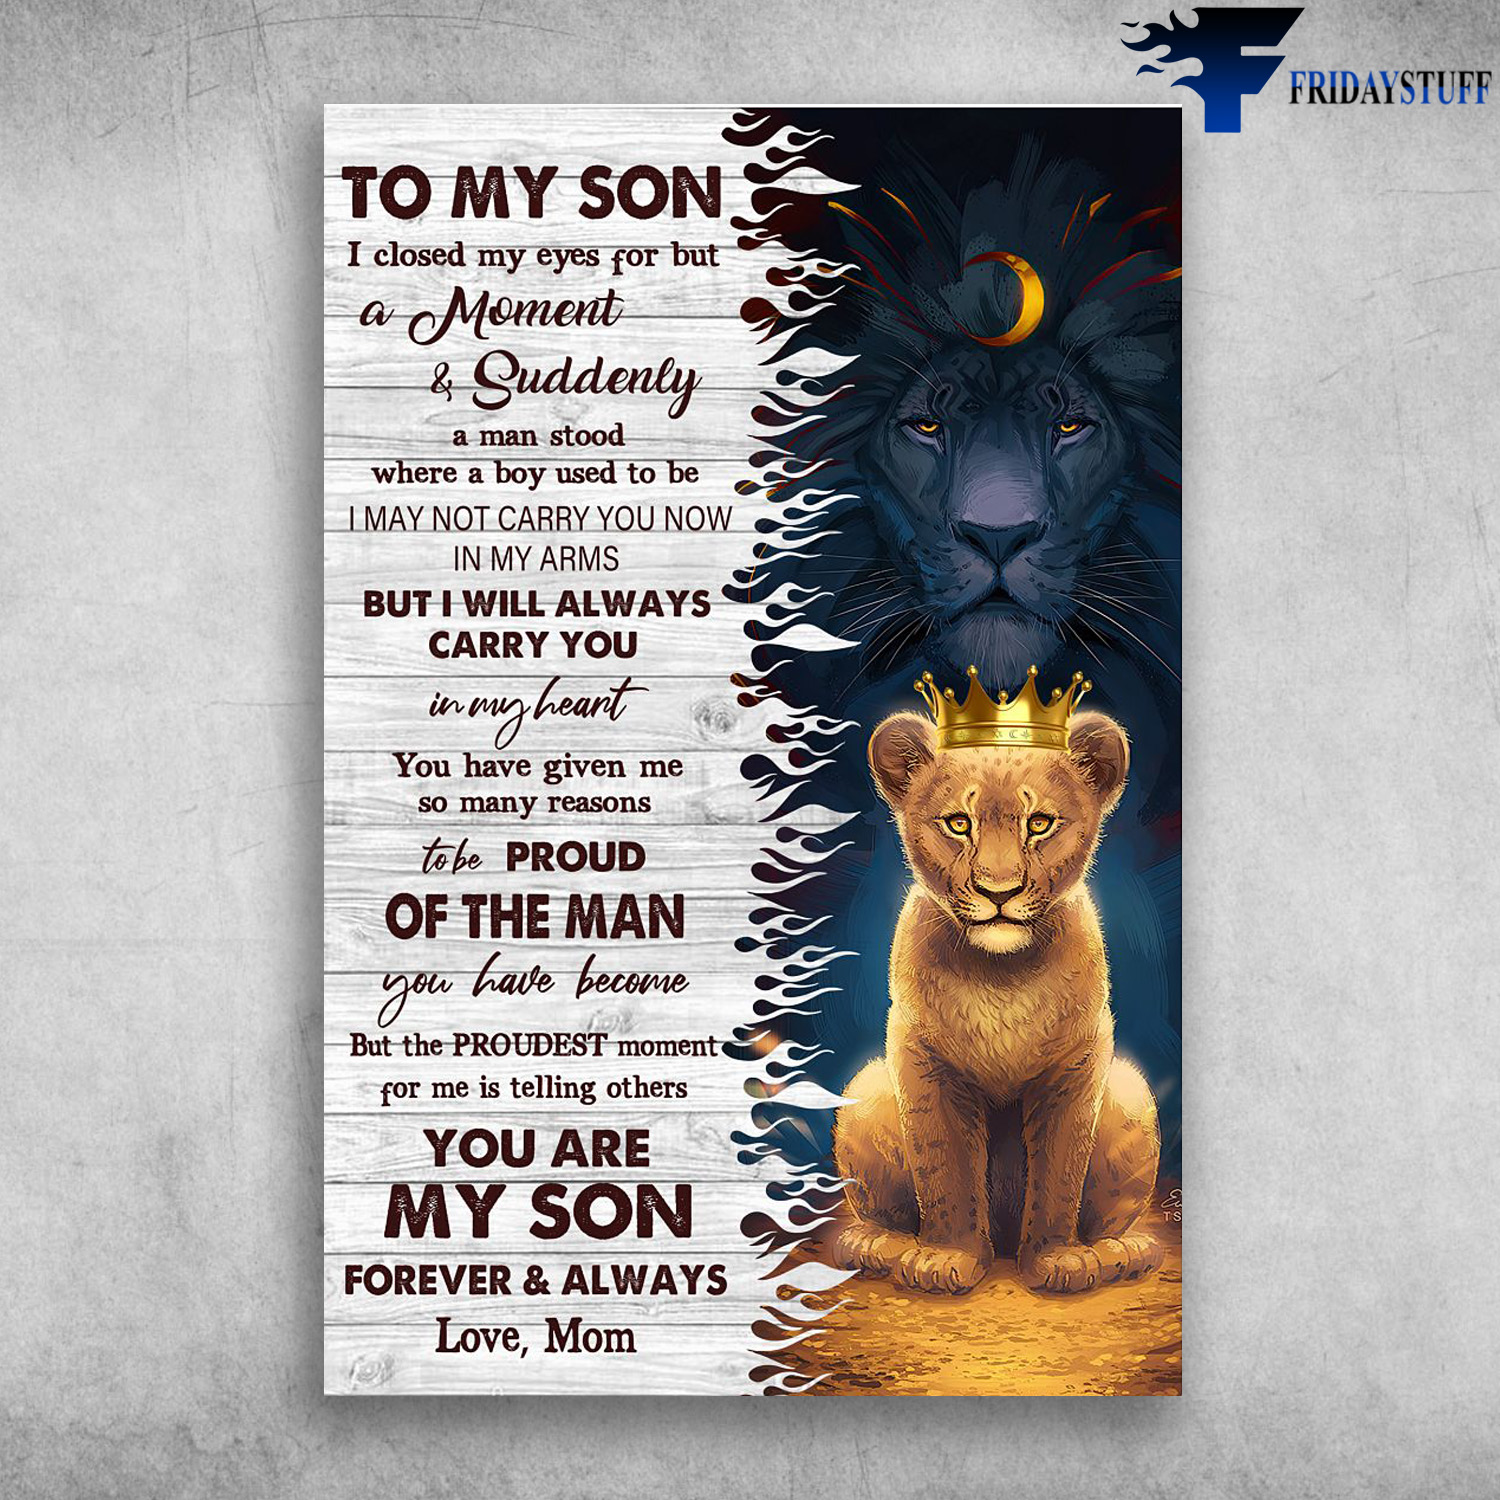 Lion And Son - To My Son, I Close My Eyes For But A Moment And Suddenly, A Man Stood Where A Boy Used To Be, I May Not Carry You Now, In My Arms, But I Will Always Carry You In My Heart, You Are My Son, Forever And Always